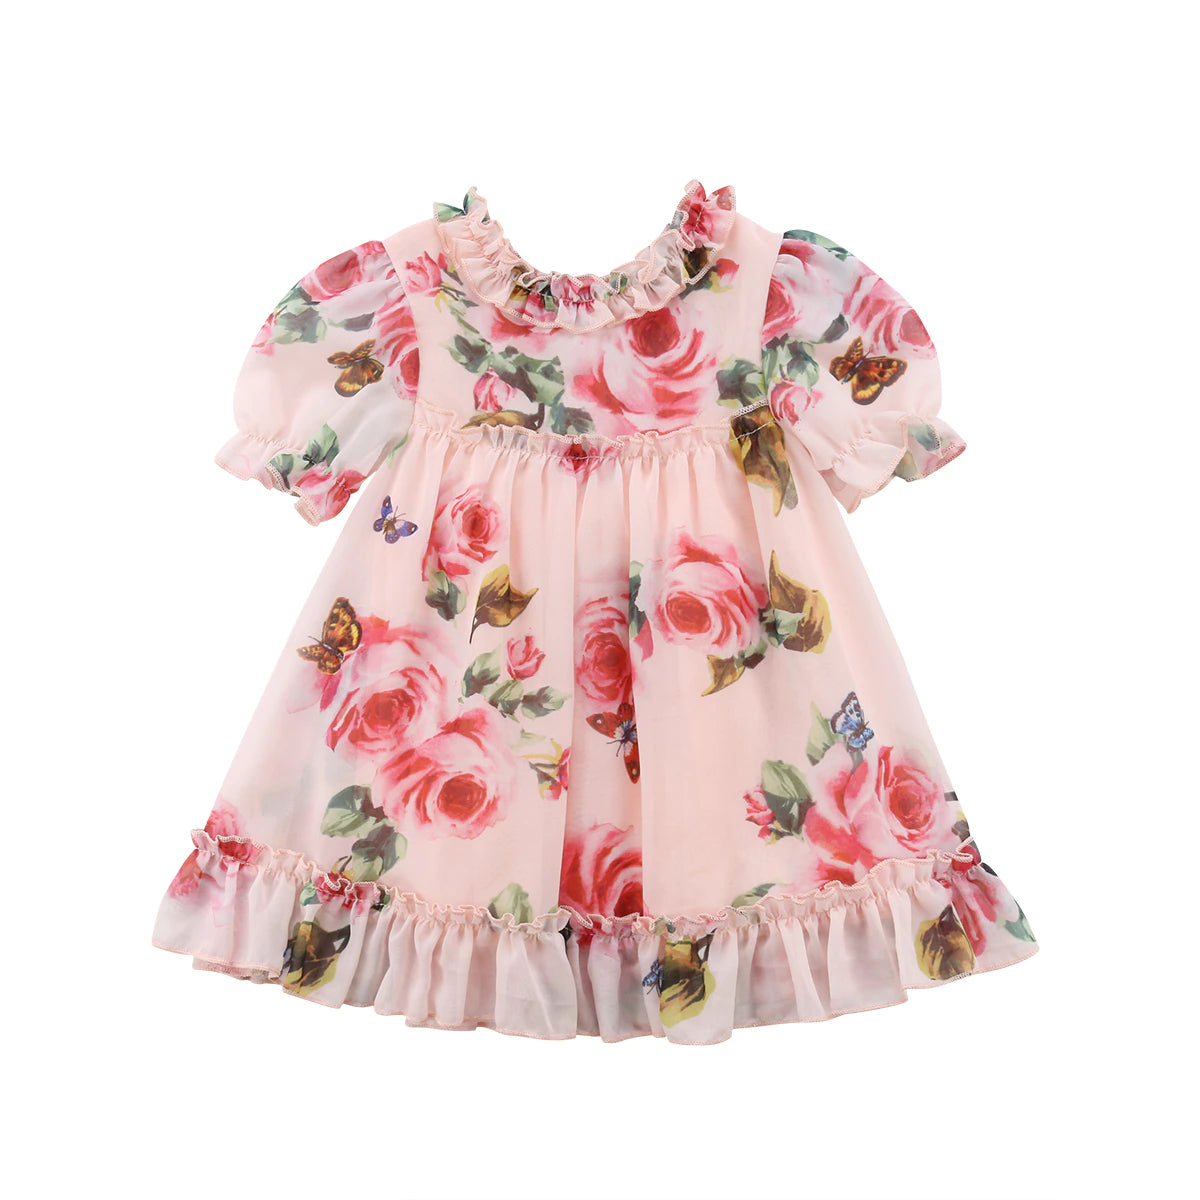 "Adorable Flower Puff Sleeve Dress for Baby Girls - Perfect for Holiday Parties and Special Occasions!"